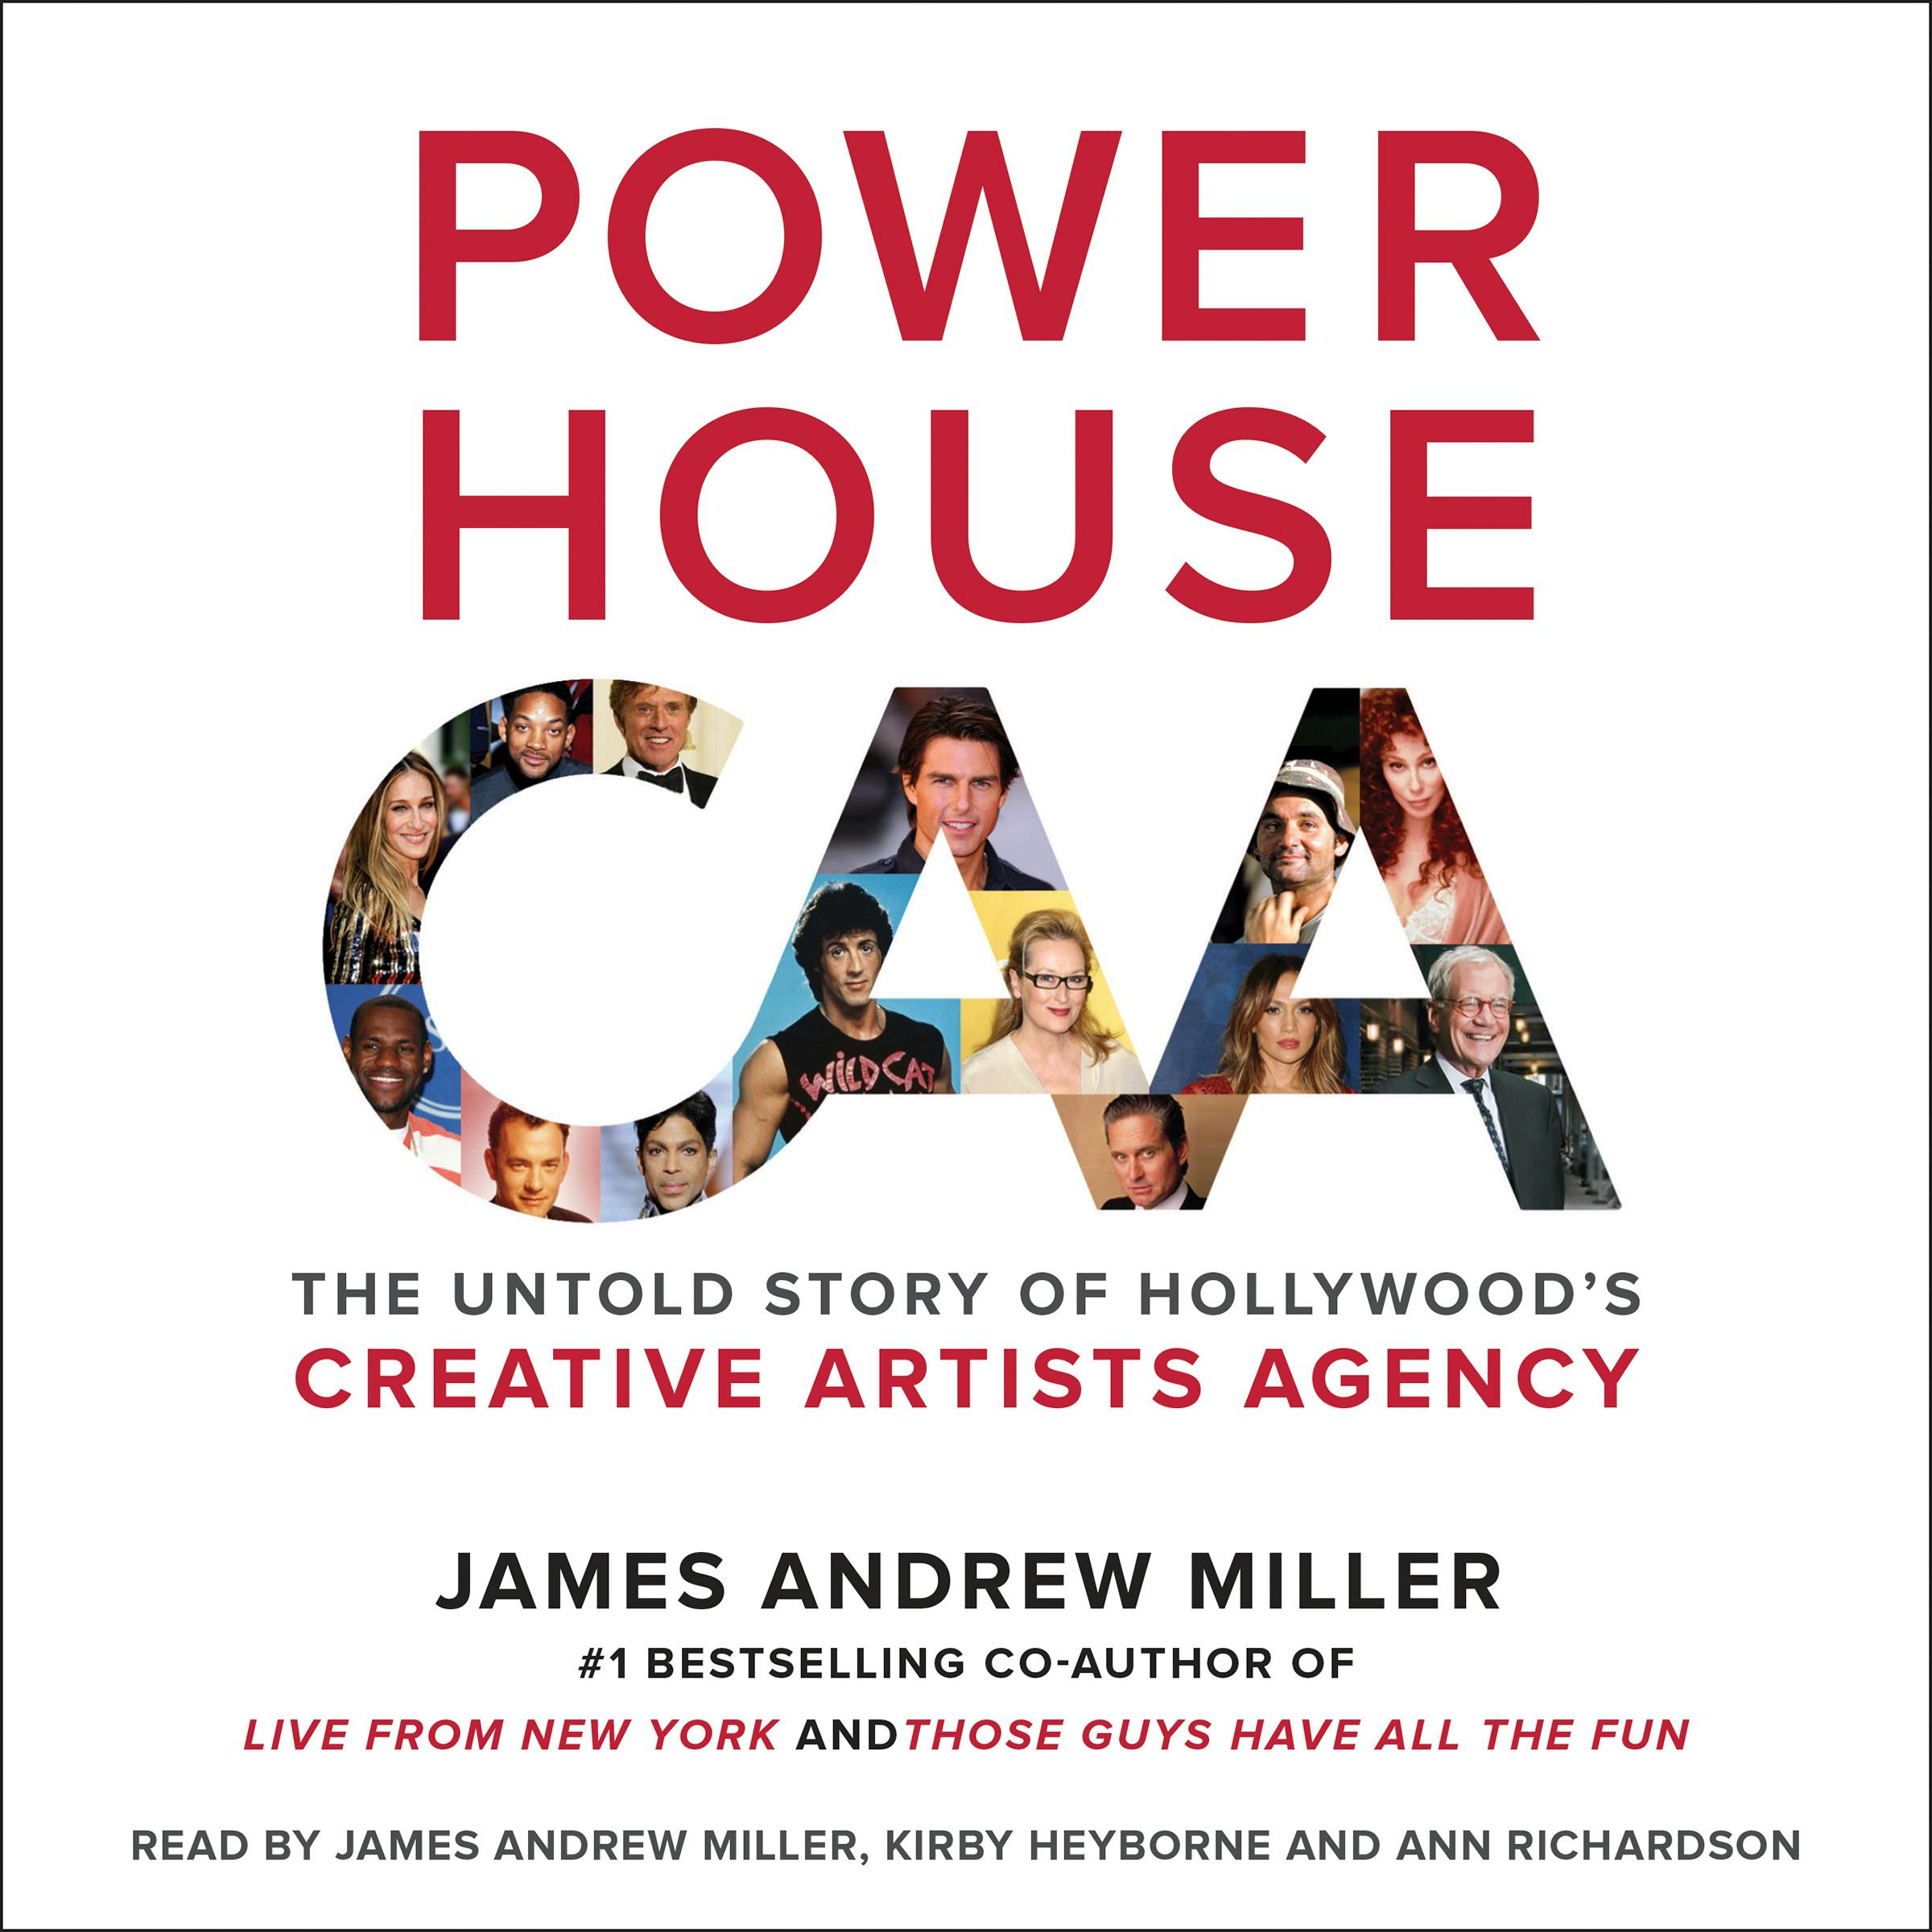 Powerhouse: The Untold Story of Hollywood's Creative Artists Agency - James Andrew Miller